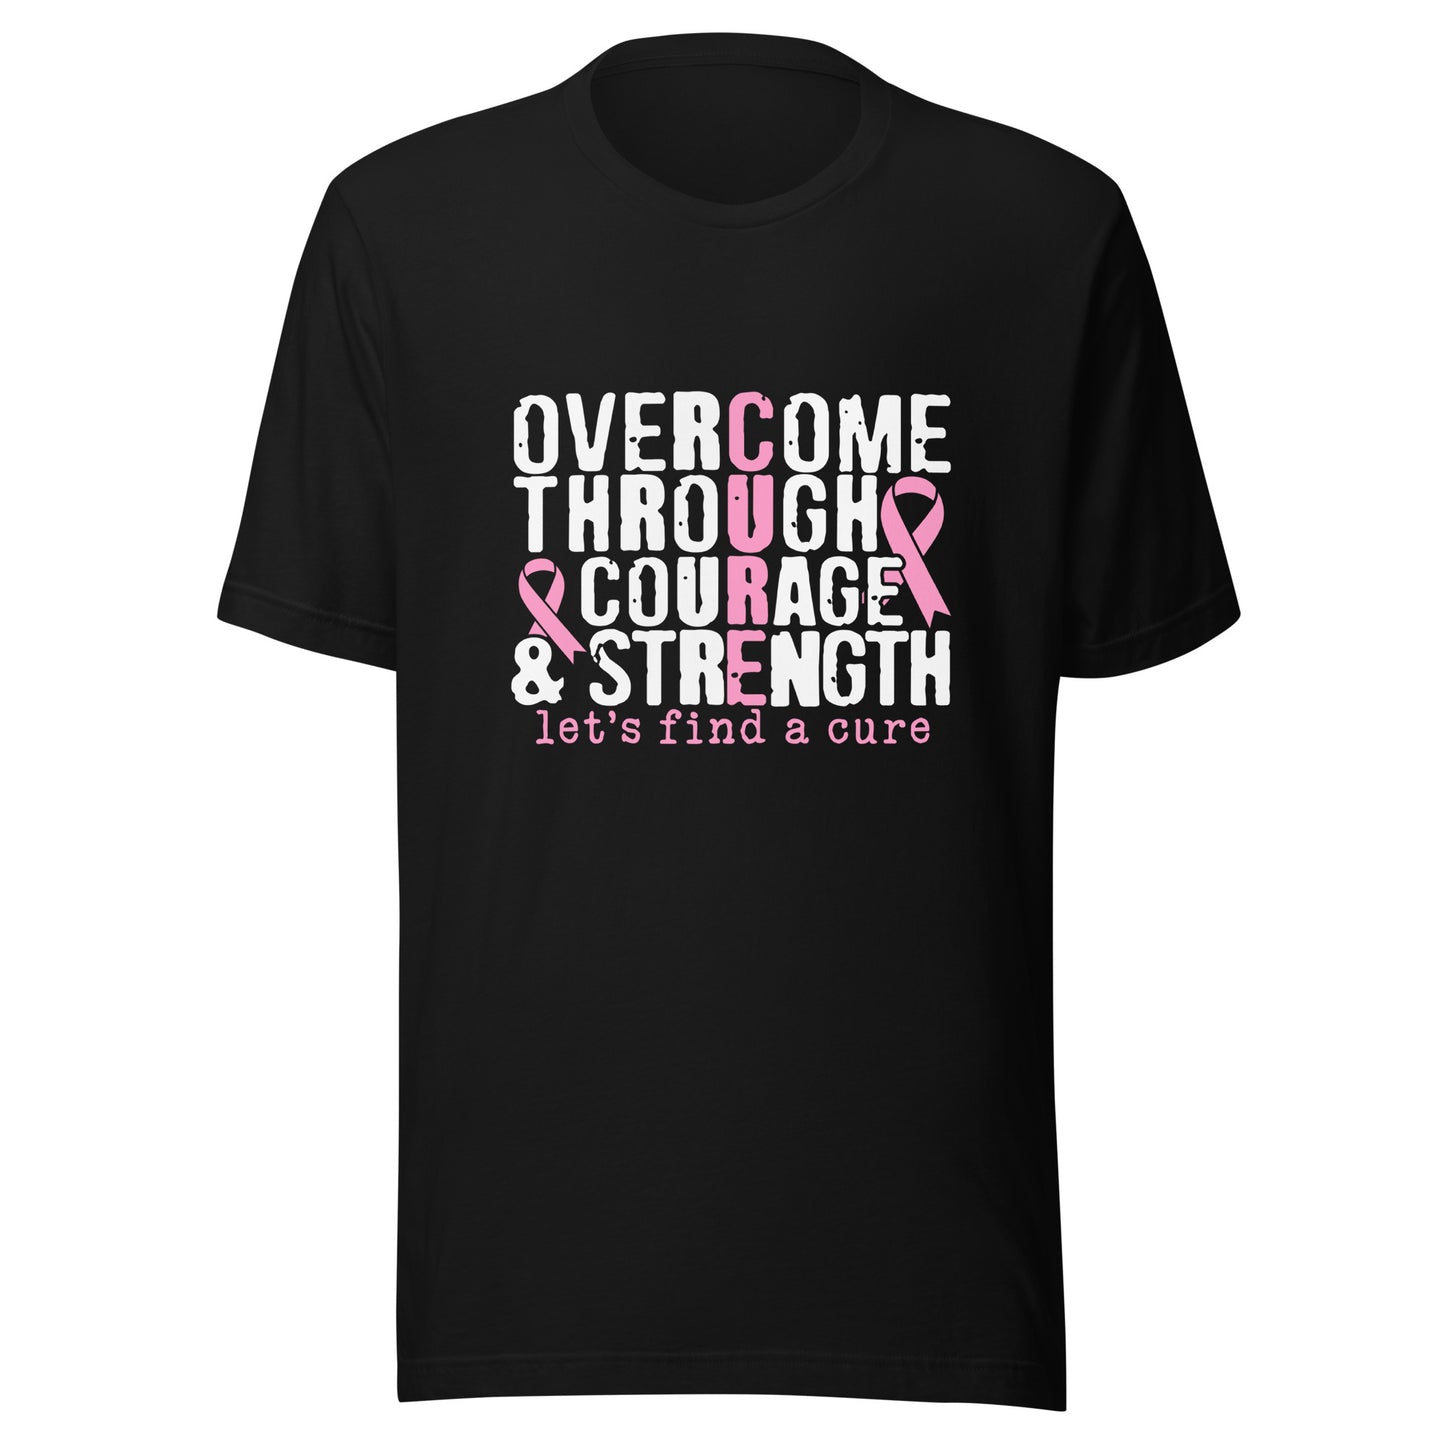 Overcome Through Courage Strength - Breast Cancer Awareness Pink Cancer Ribbon Support Unisex T-shirt